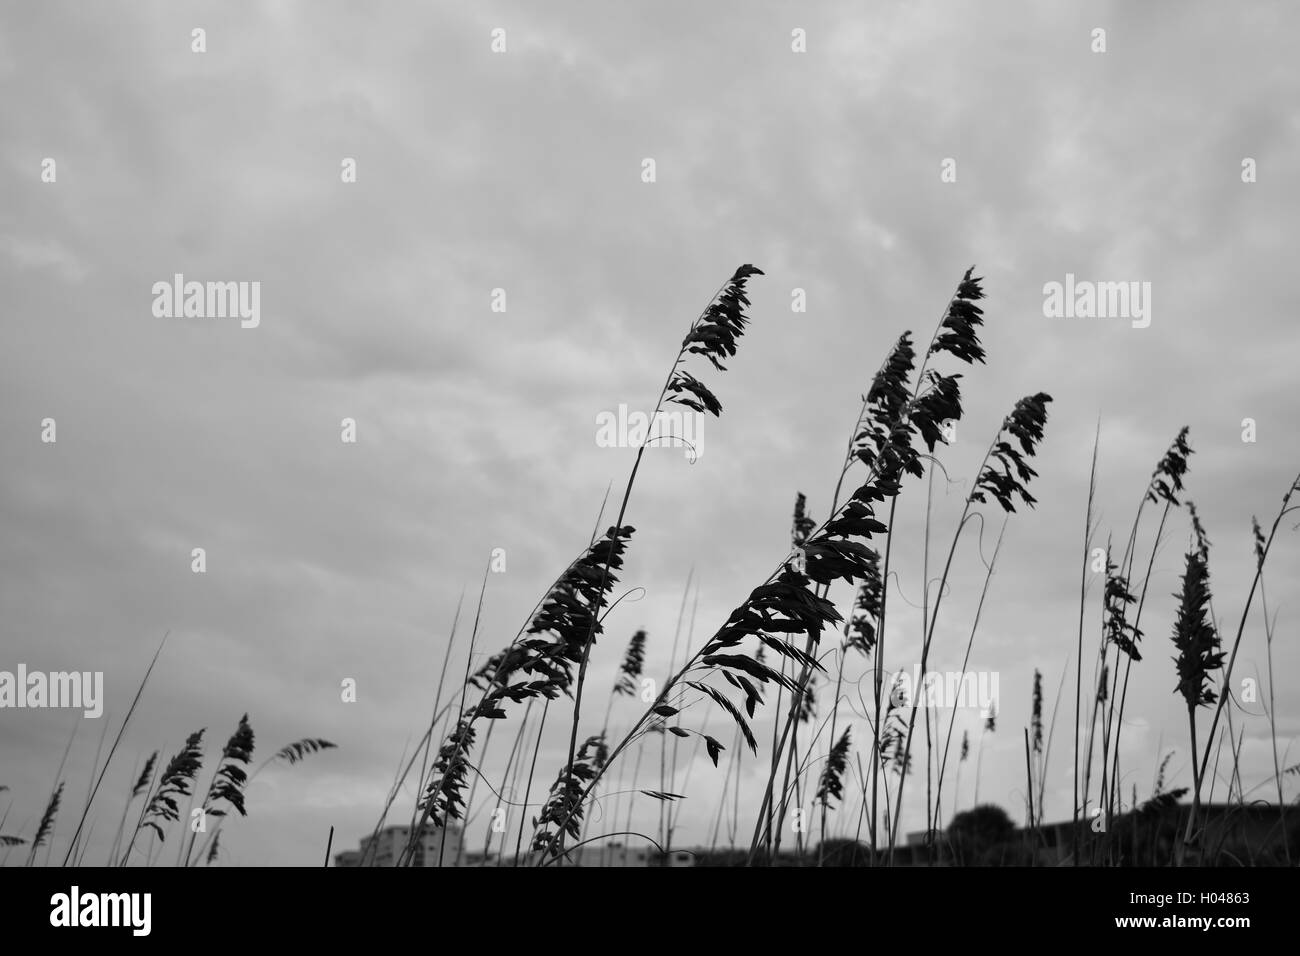 Sea oats blowing in the wind on a stormy day on Cocoa beach, Florida. Stock Photo